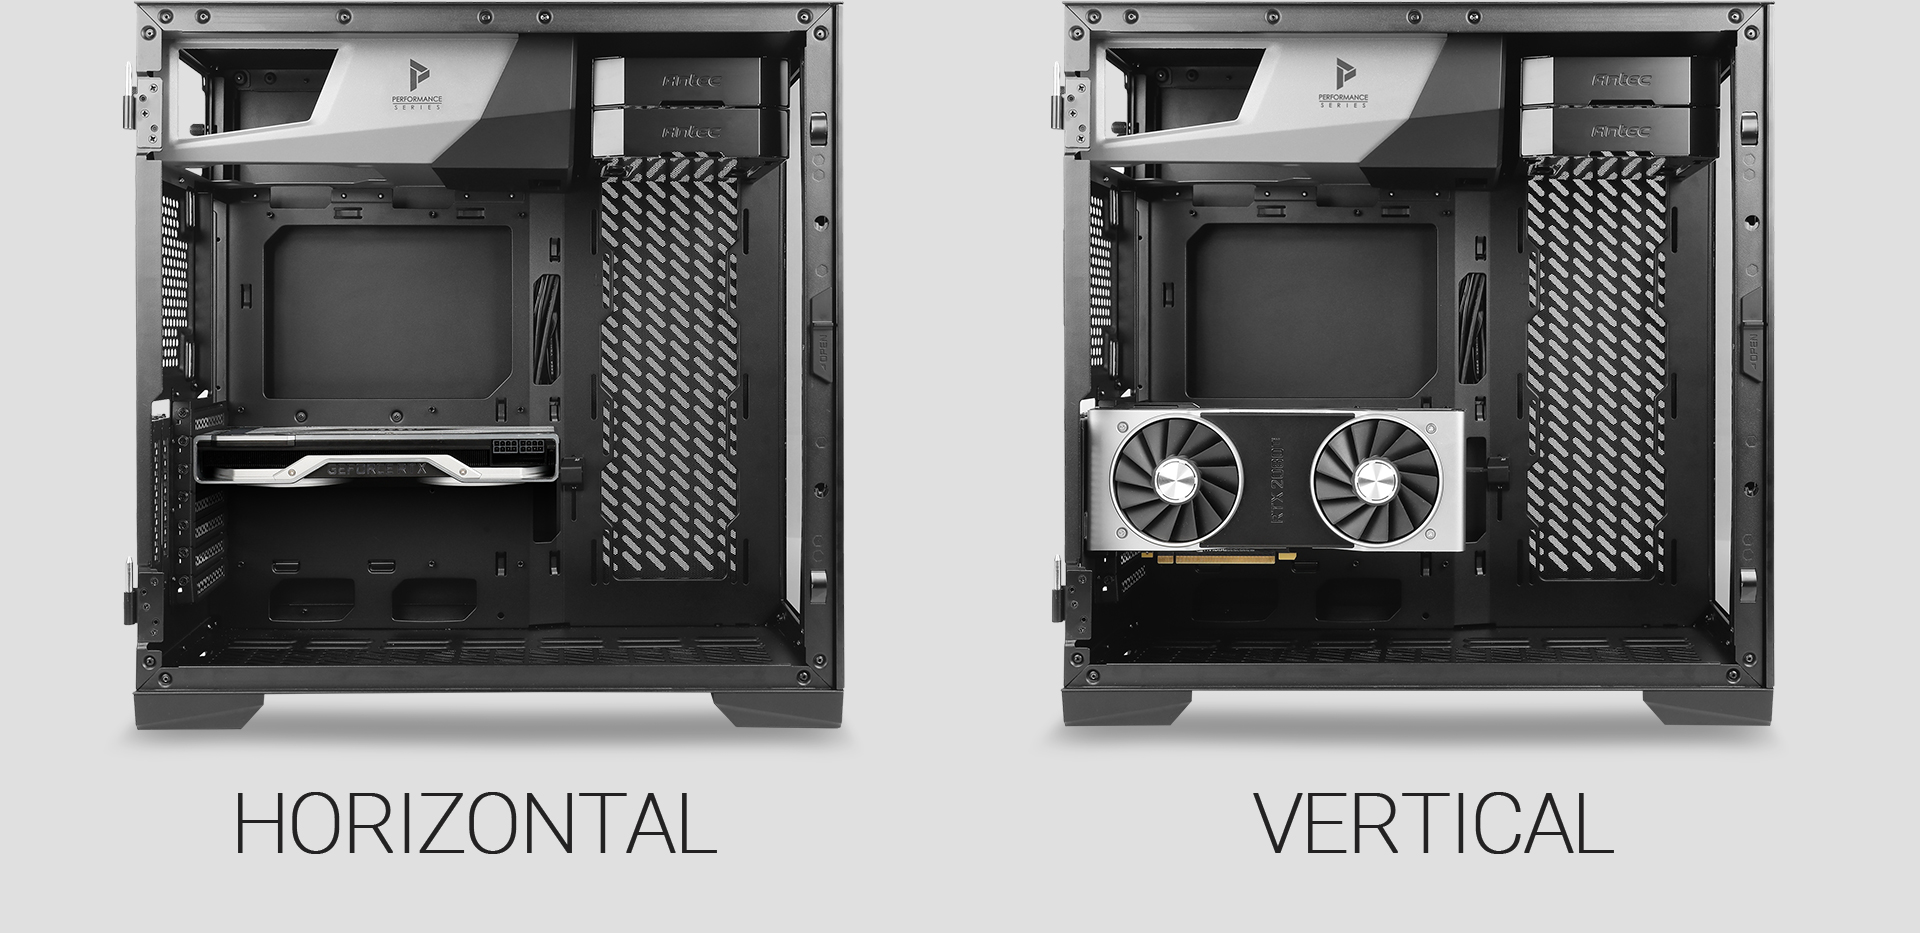 Antec Performance Series P120 Crystal E-ATX Mid-Tower Case HORIZONTAL and VERTICAL comparison chart